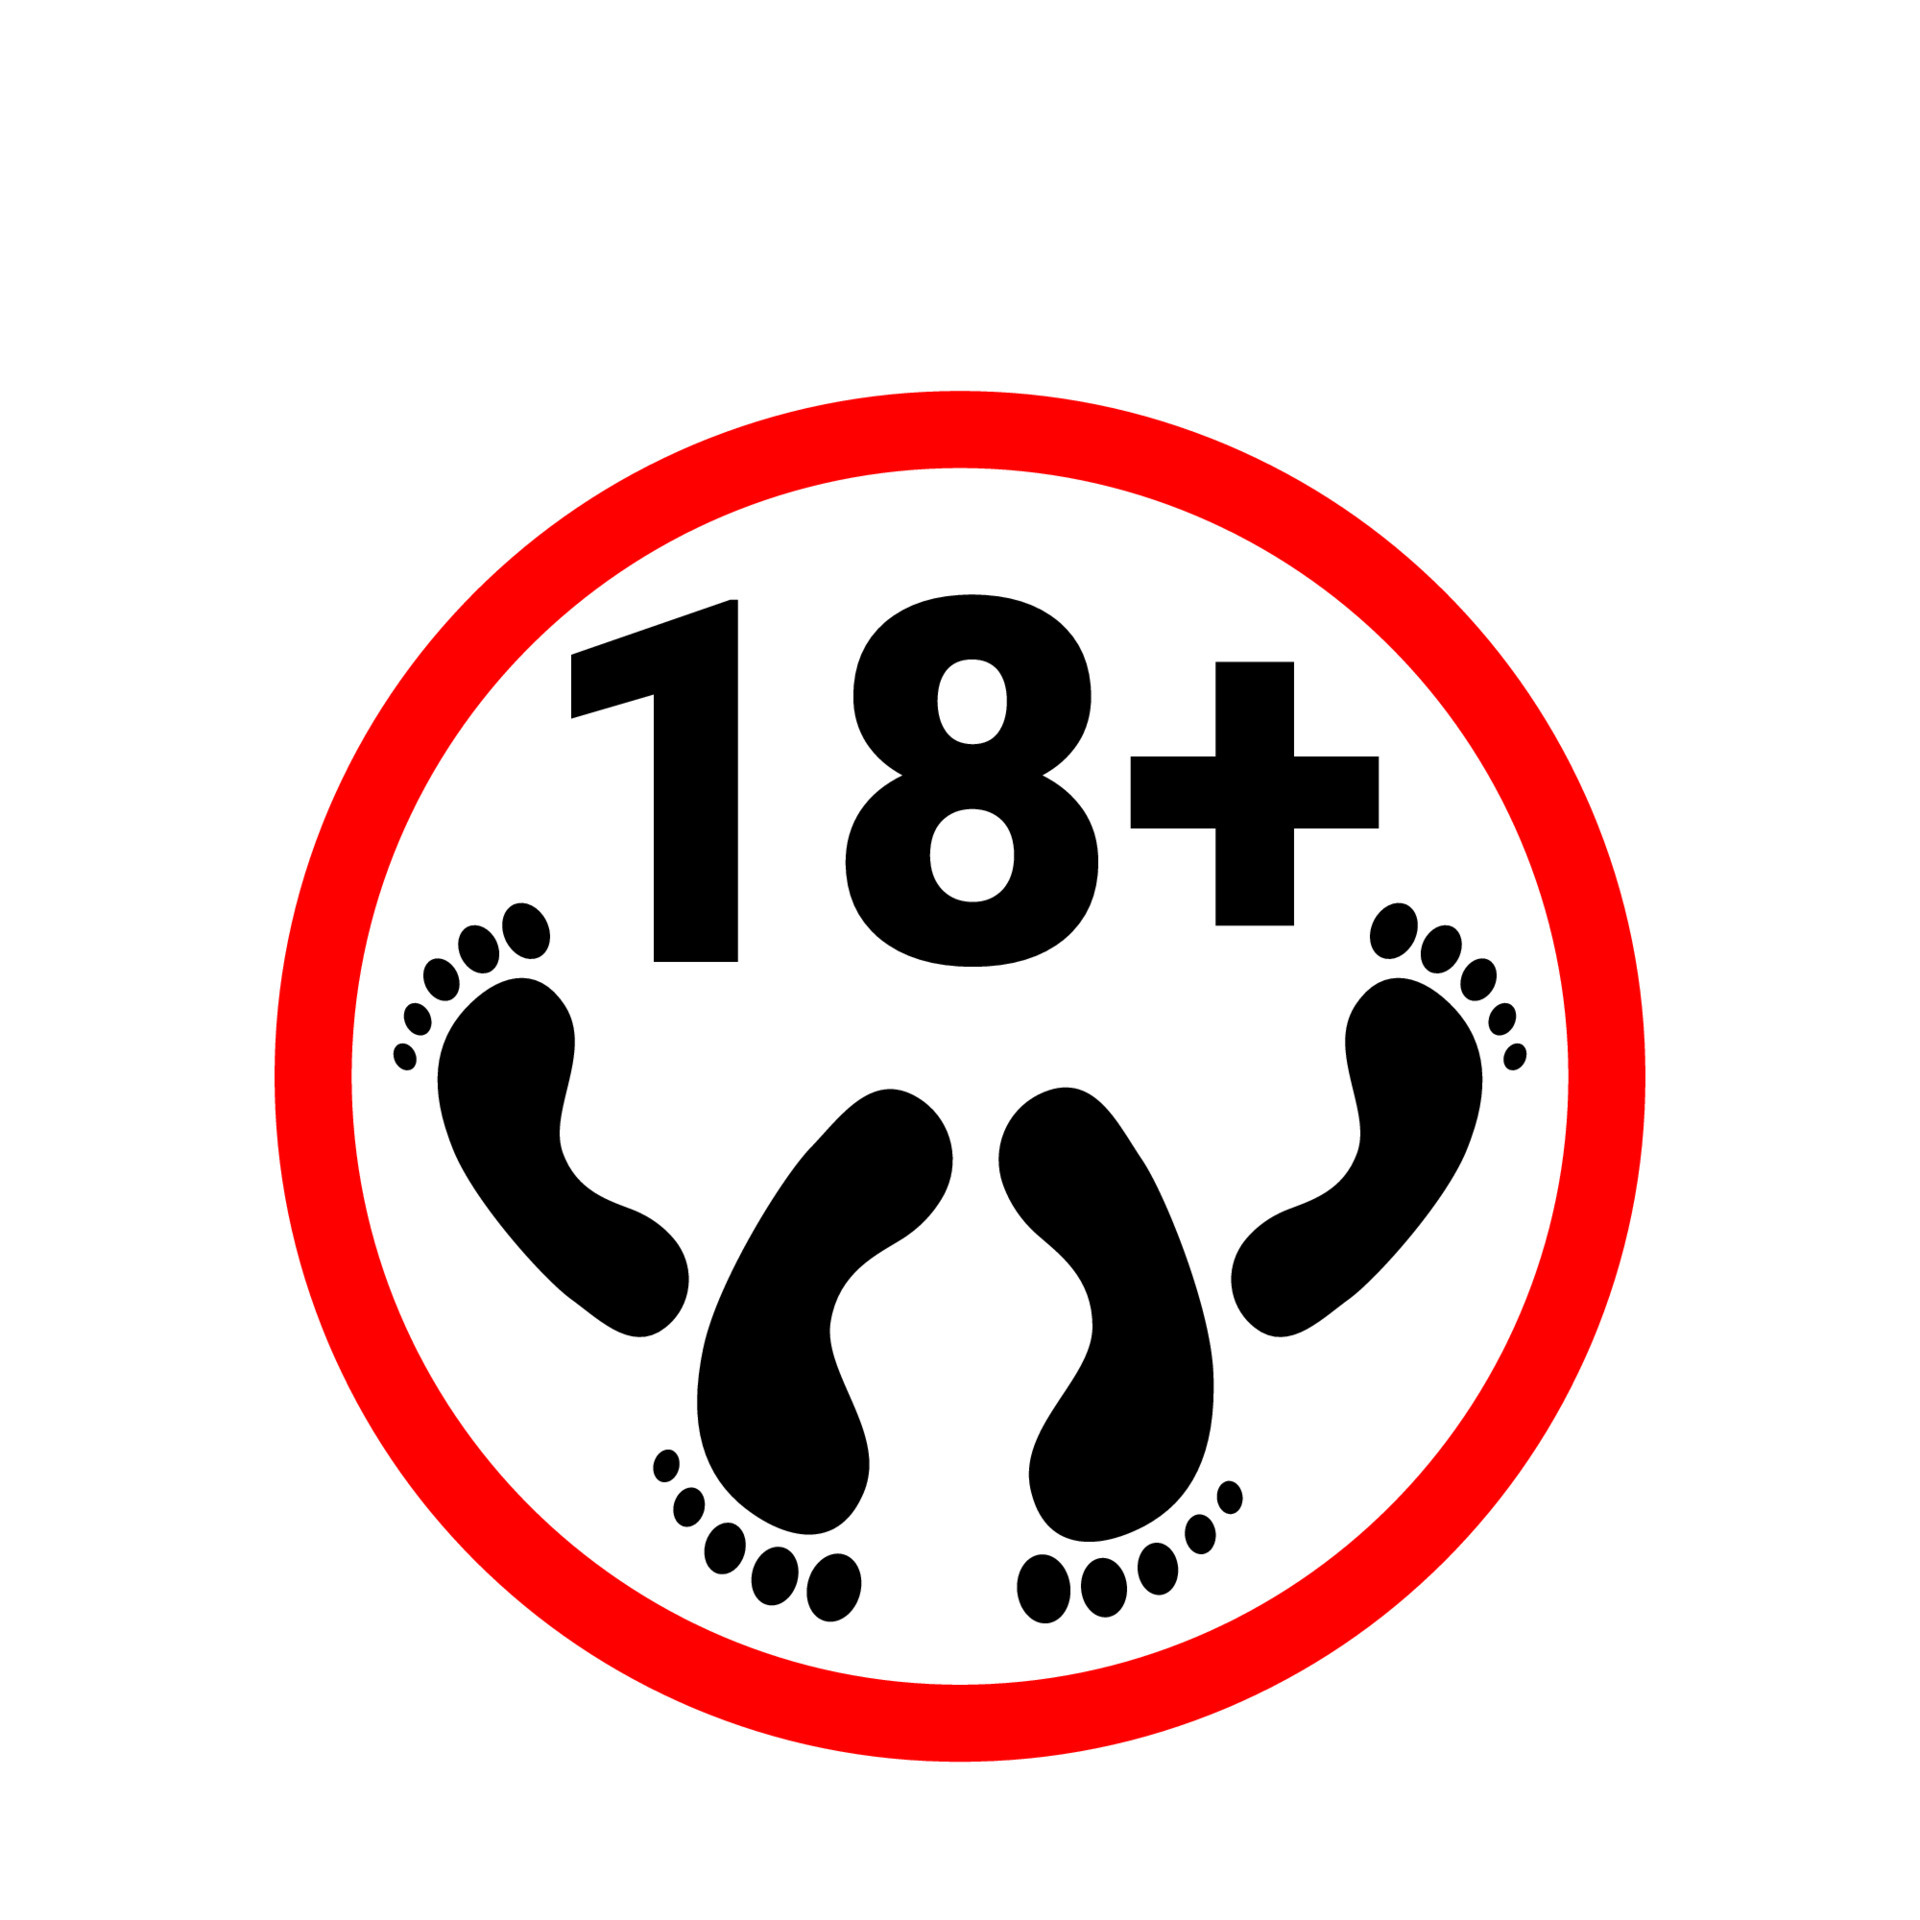 18 plus icon. Prohibition sign for persons under eighteen years of